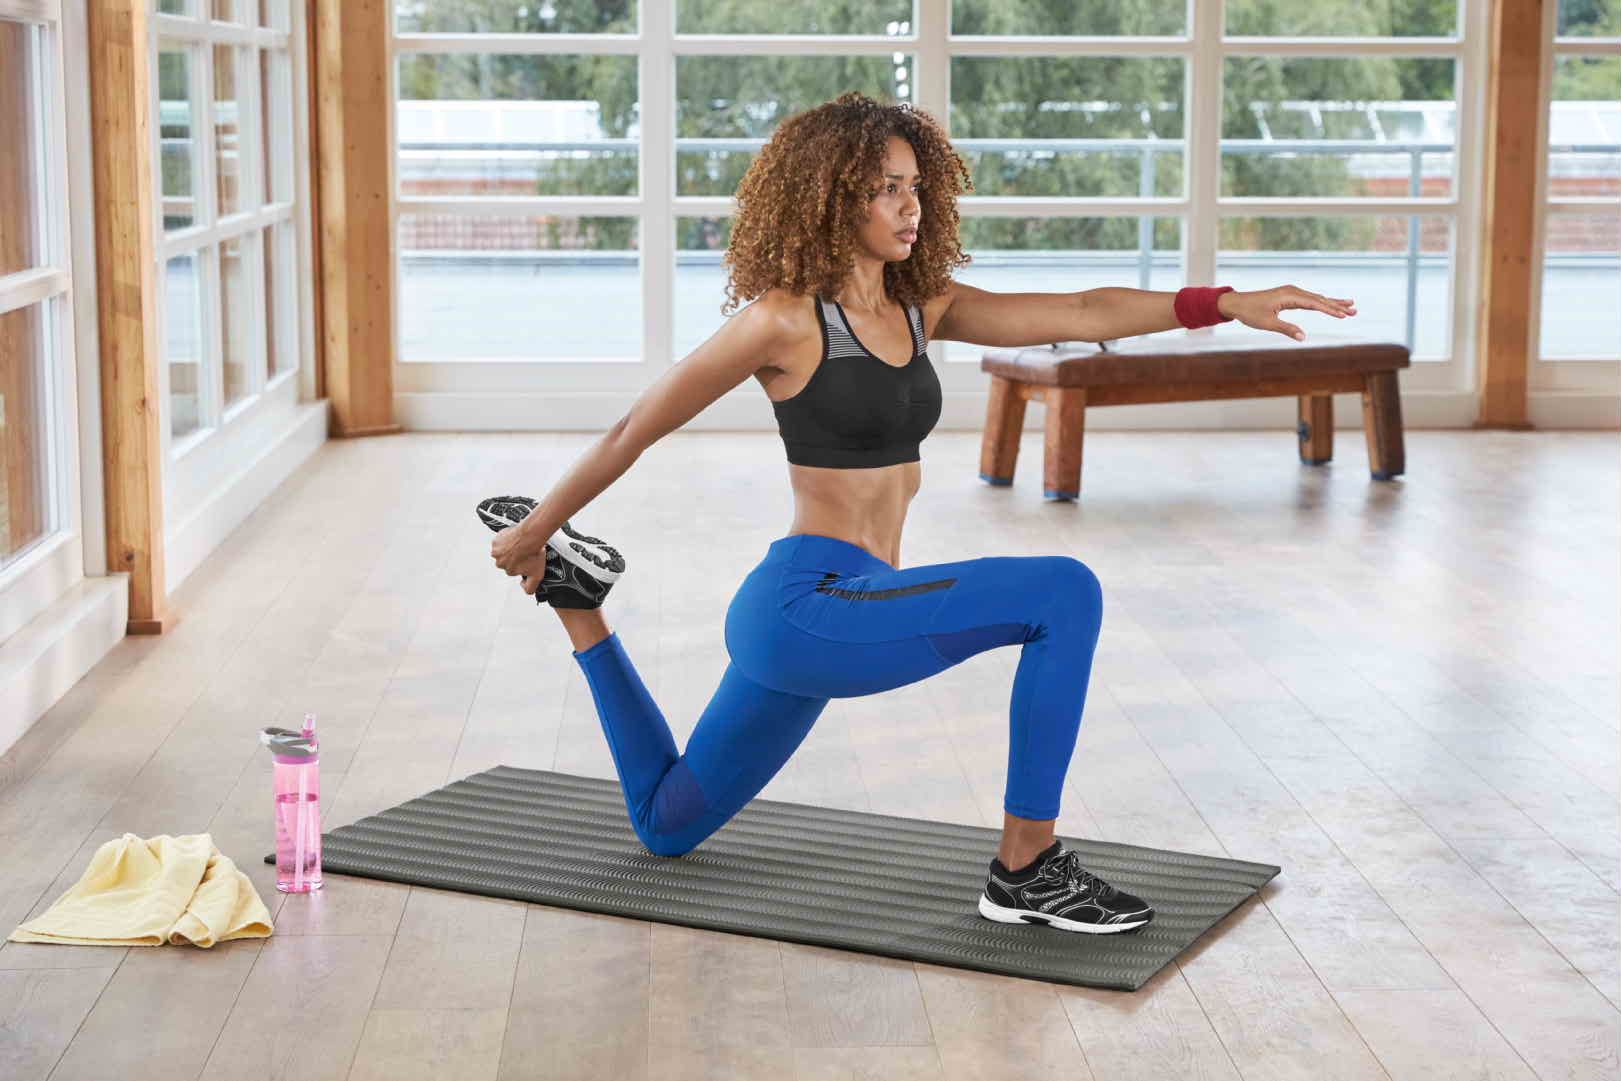 Lidl have launched their prices home-gym at own range, with starting